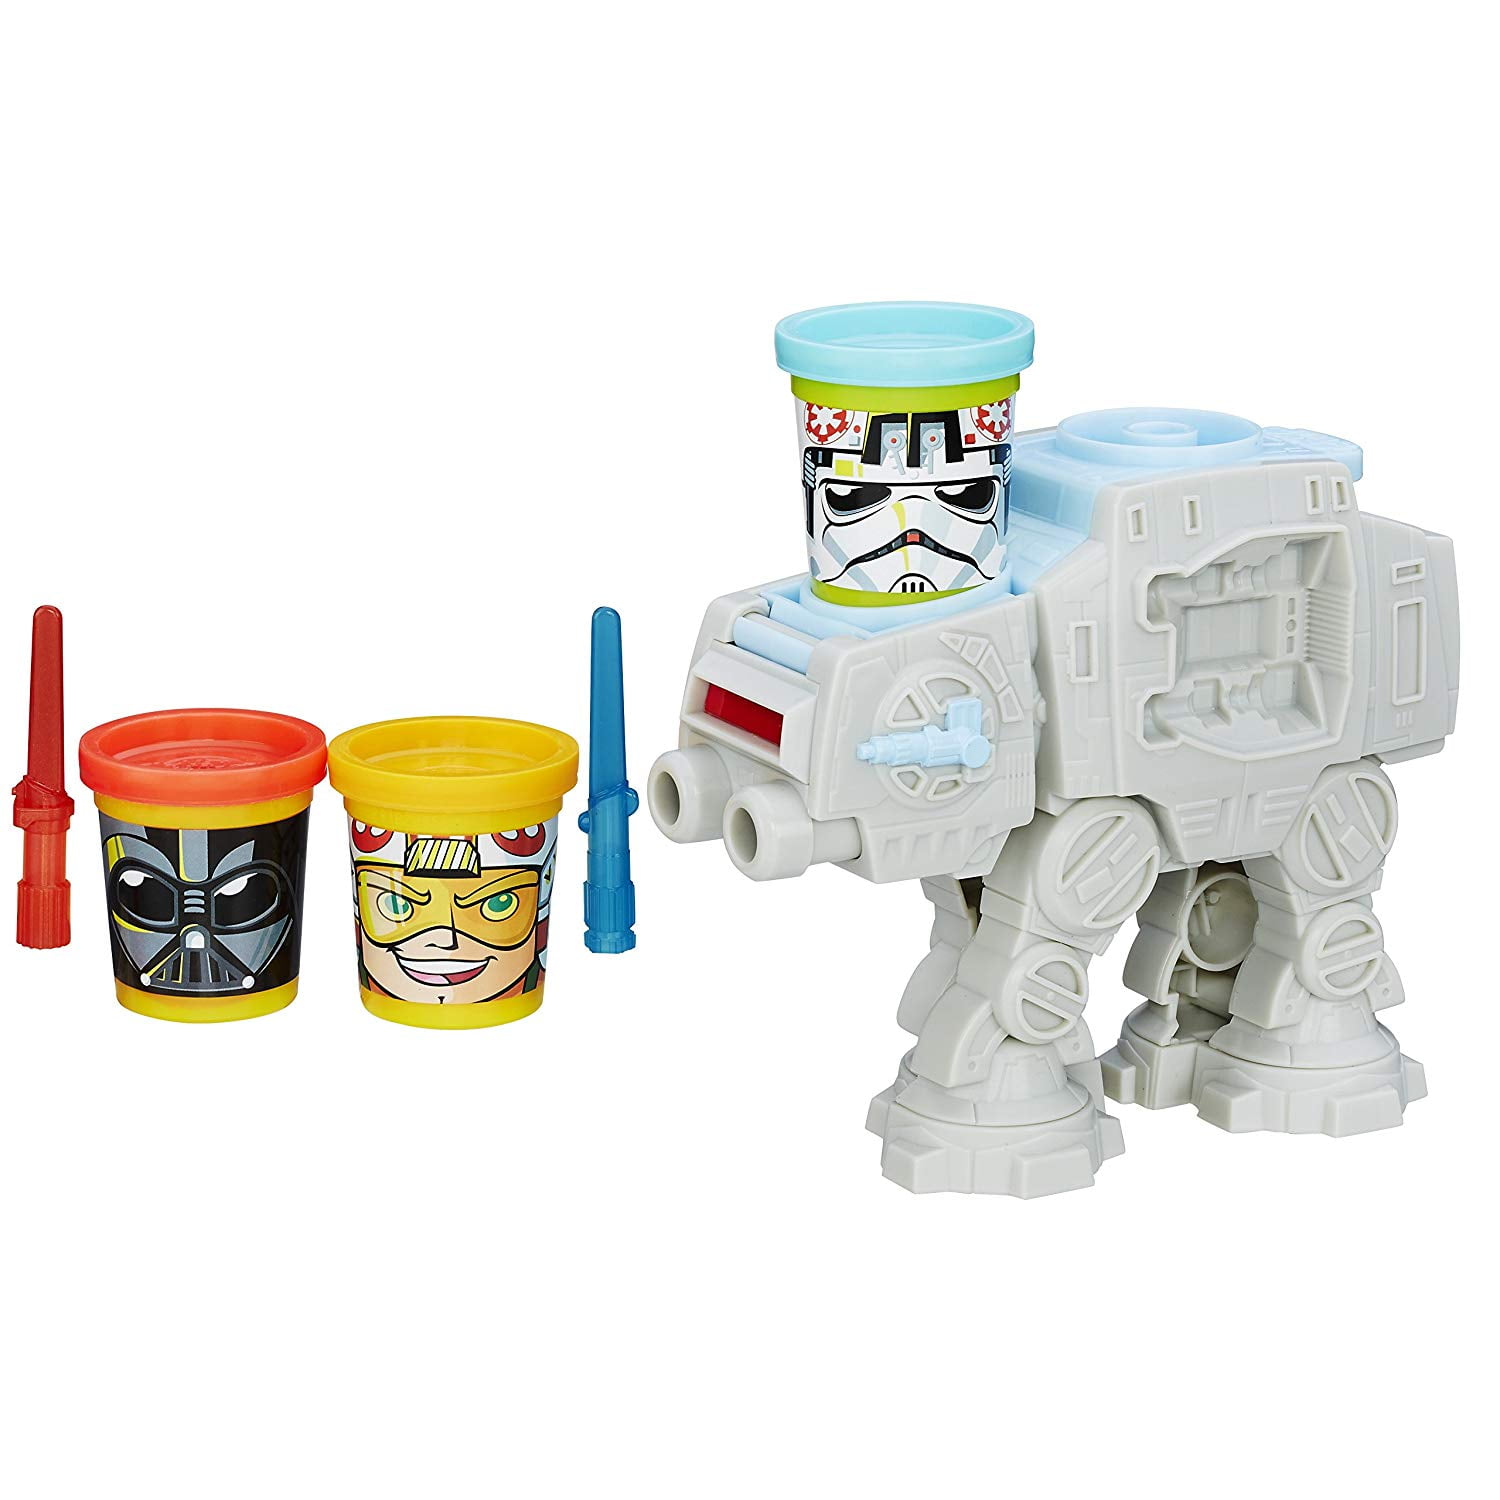 NEW STAR WARS CAN-HEADS ALL-STAR ATTACK COMPLETE 10 CHARACTER PLAY-DOH SET $50 